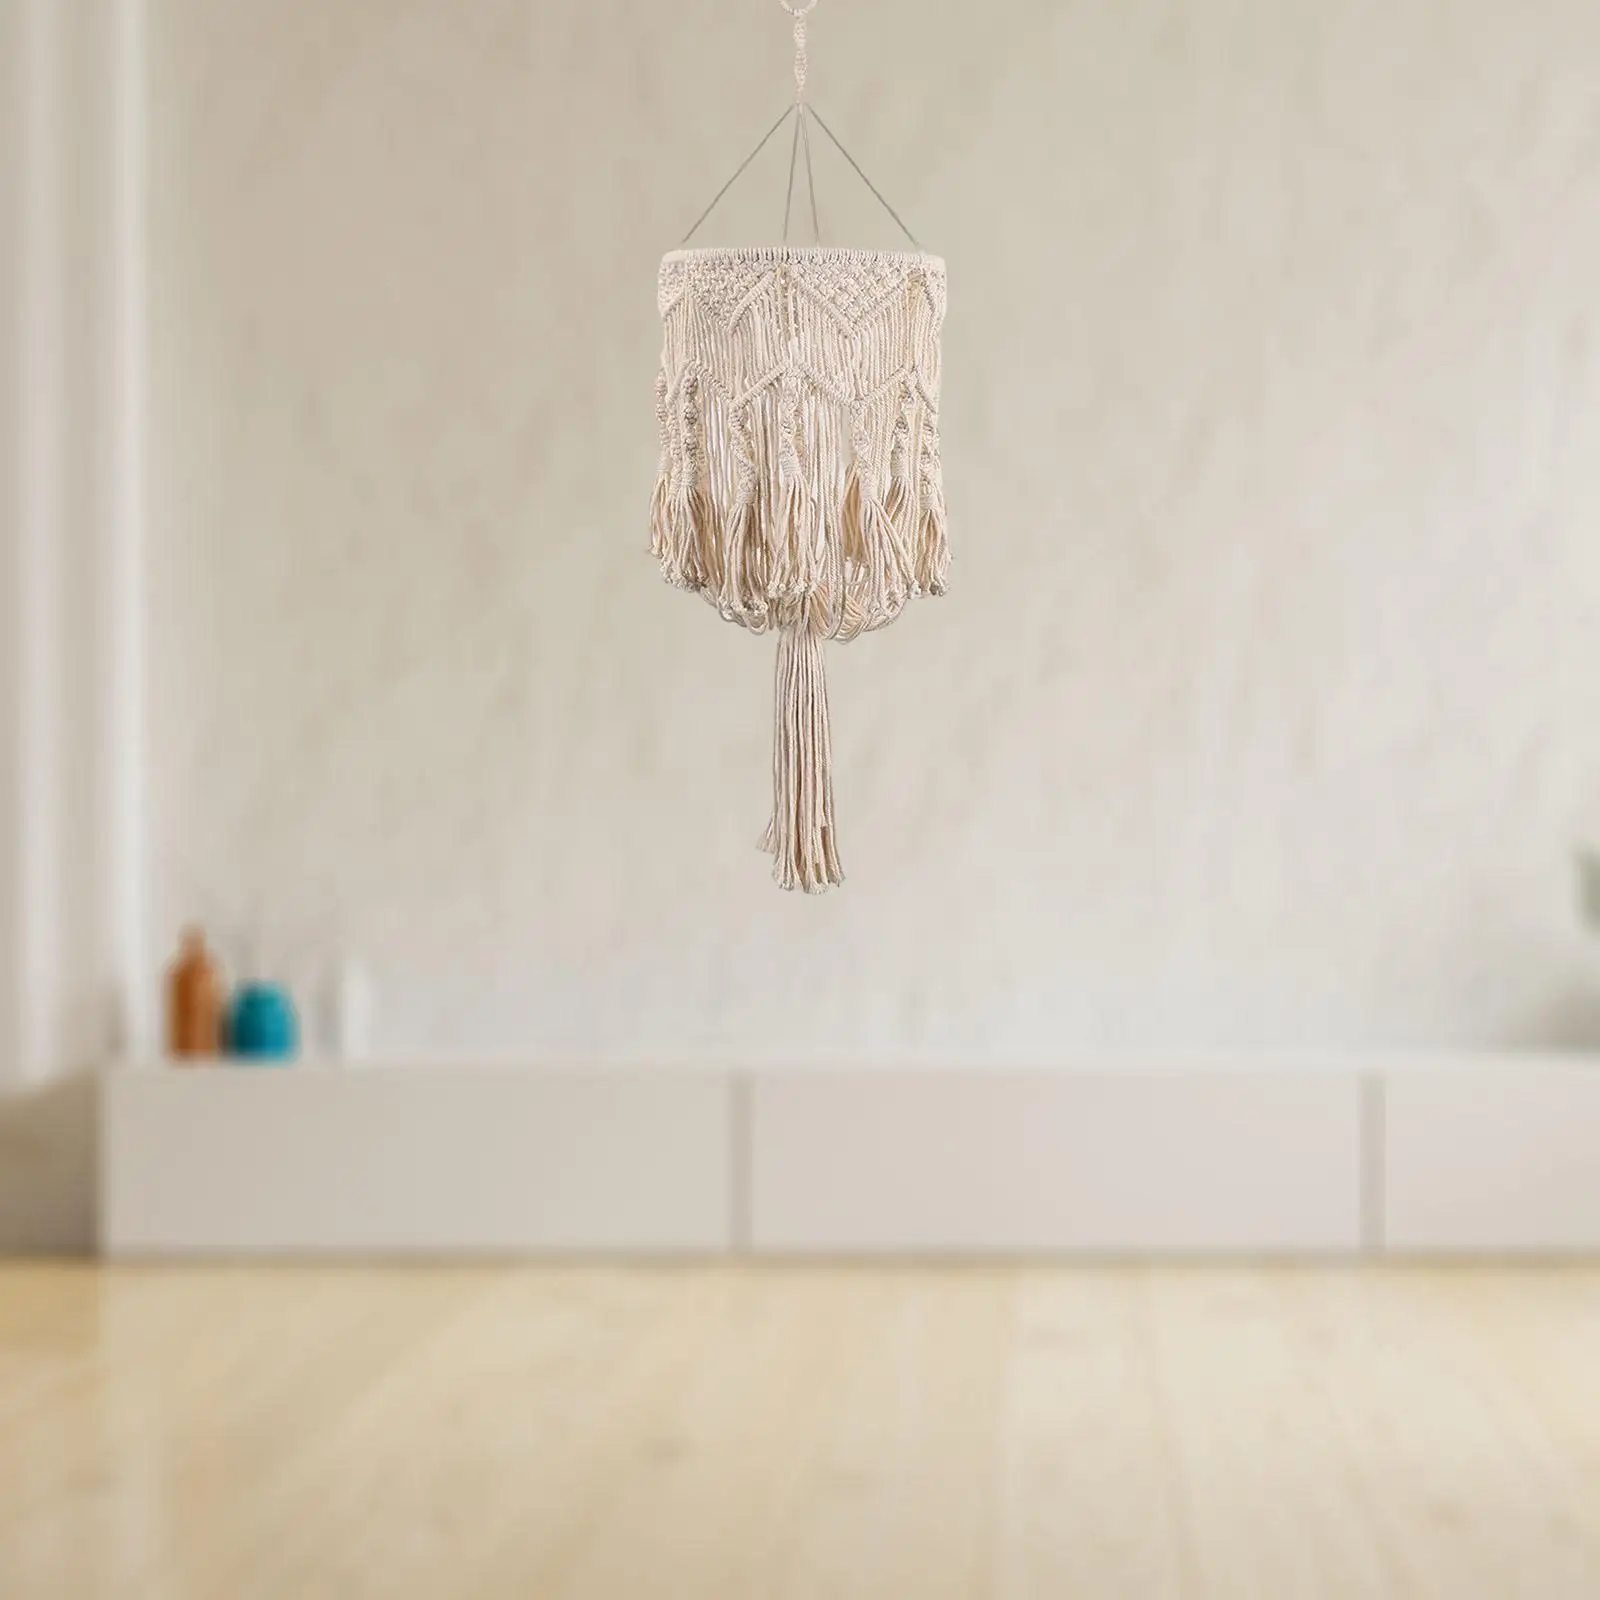 Macrame Tassel Lamp Shade Ceiling Light Cover Boho Hanging Handmade Woven Lampshade for Party Nursery Bedroom Hotel Decoration